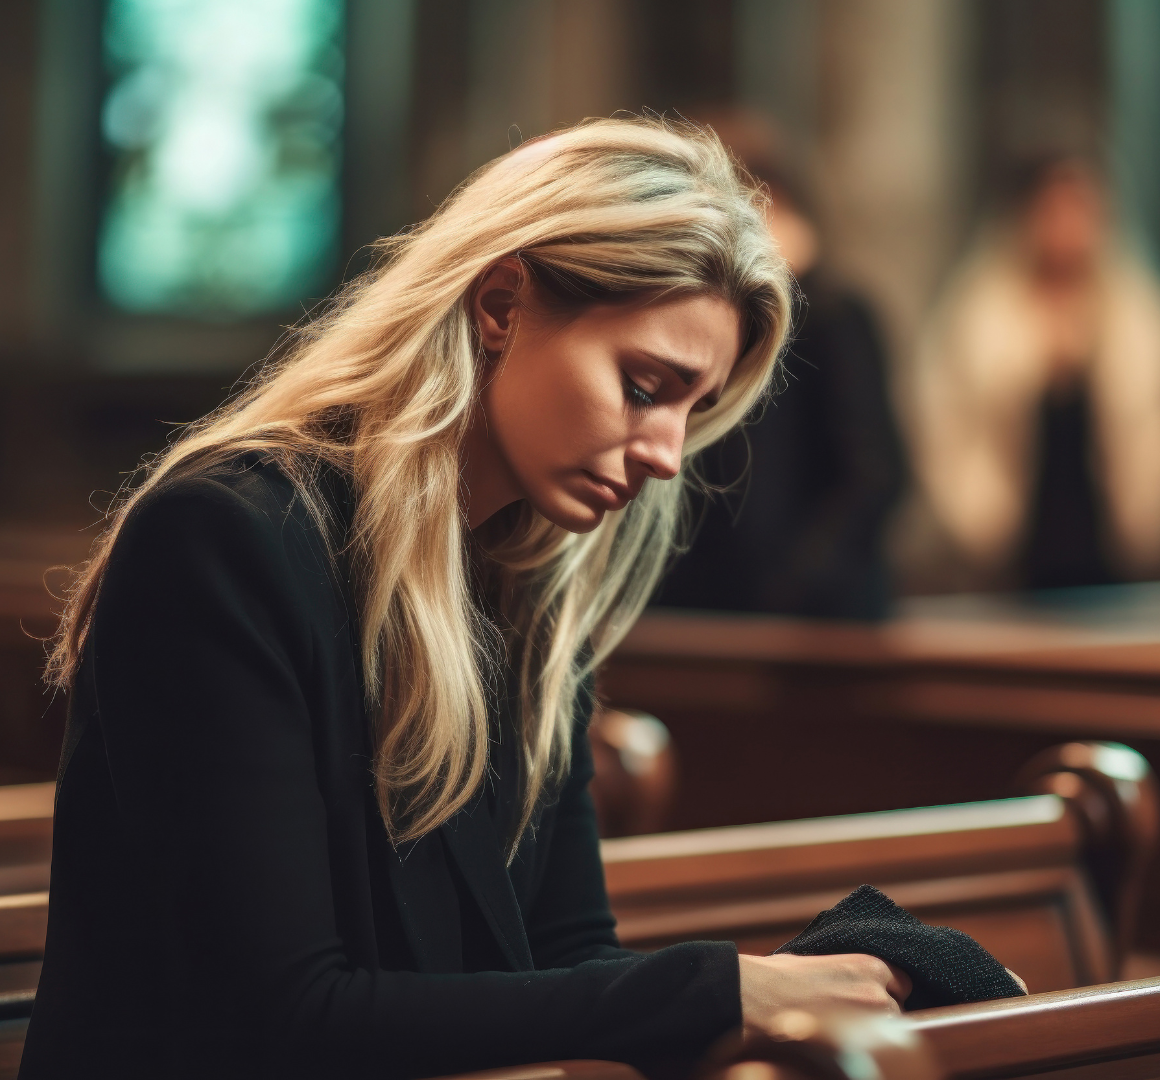 A blonde woman, dressed in black, sits on a brown wooden pue in a church with stained glass windows. Her head is lowered and her face is saddened. there are other blurry figures in the background.